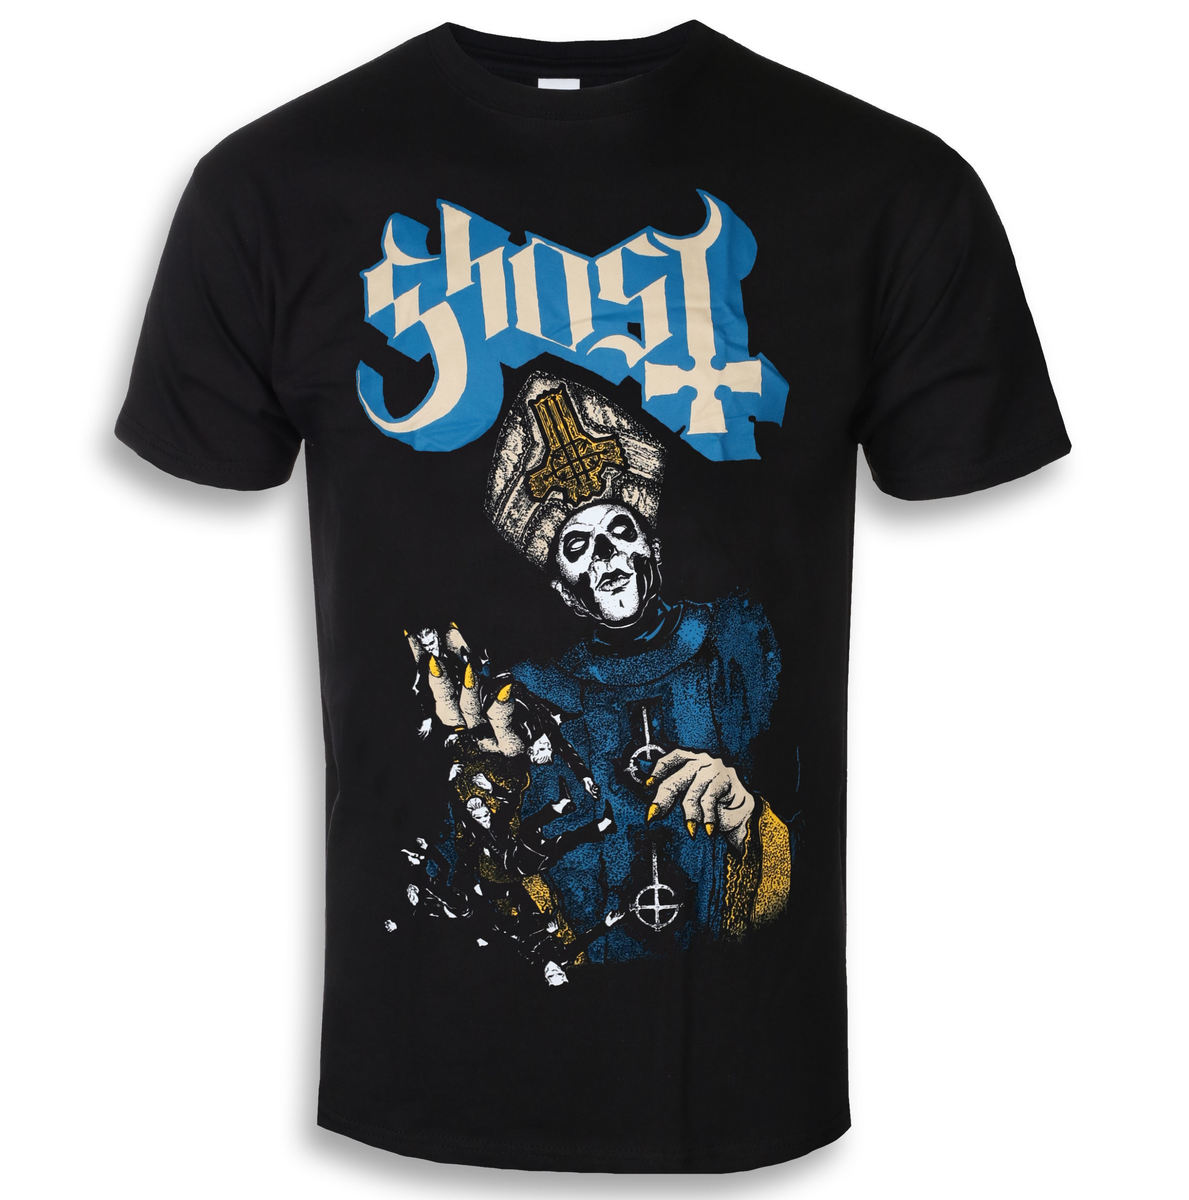 Ghost - Papa Of The World (Small)